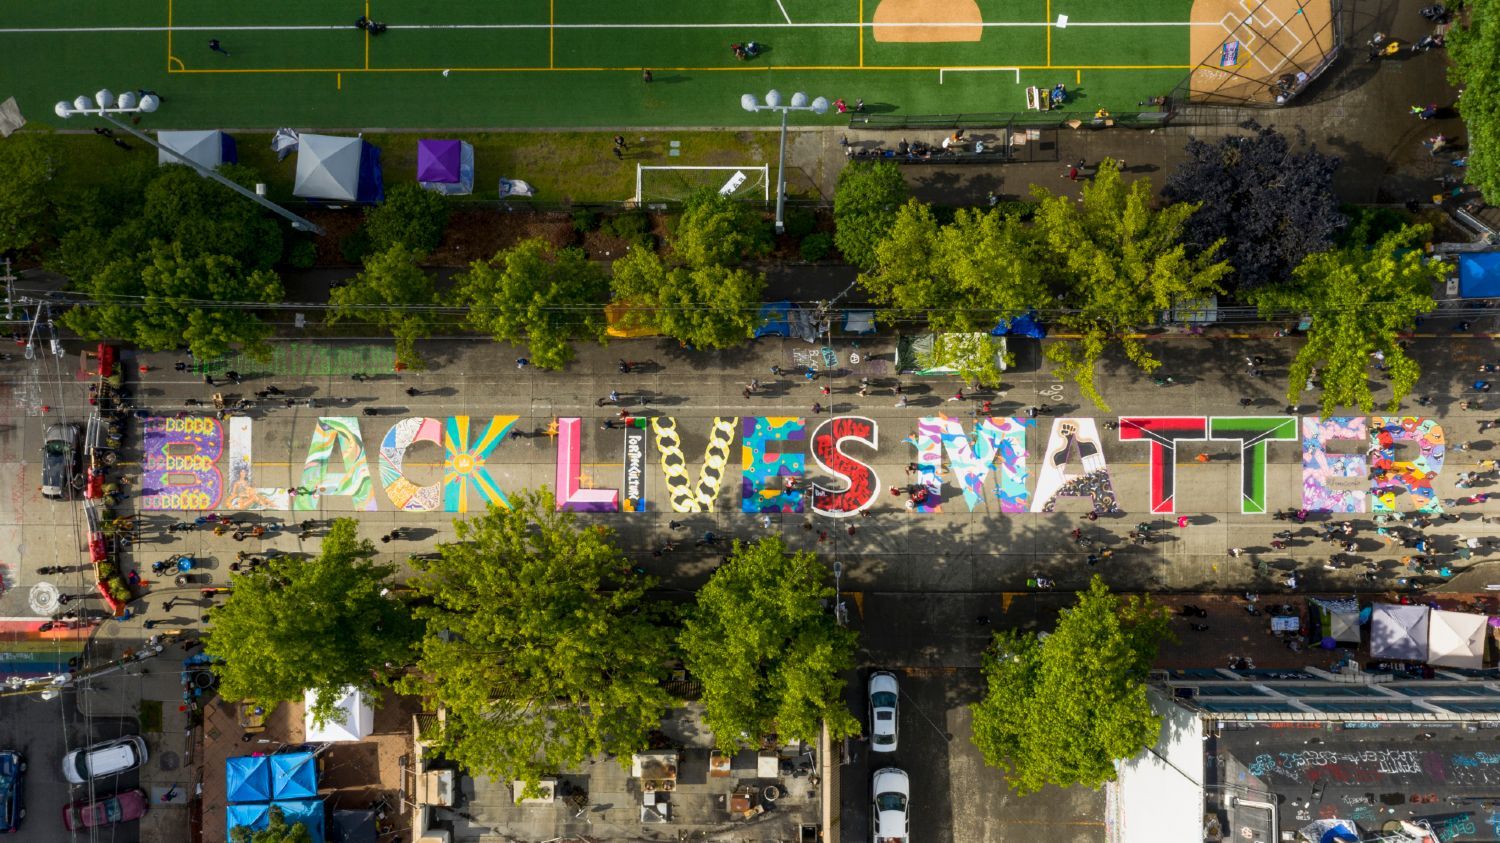 Aerial shot of Seattle CHOP zone, with "Black Lives Matter" painted on street